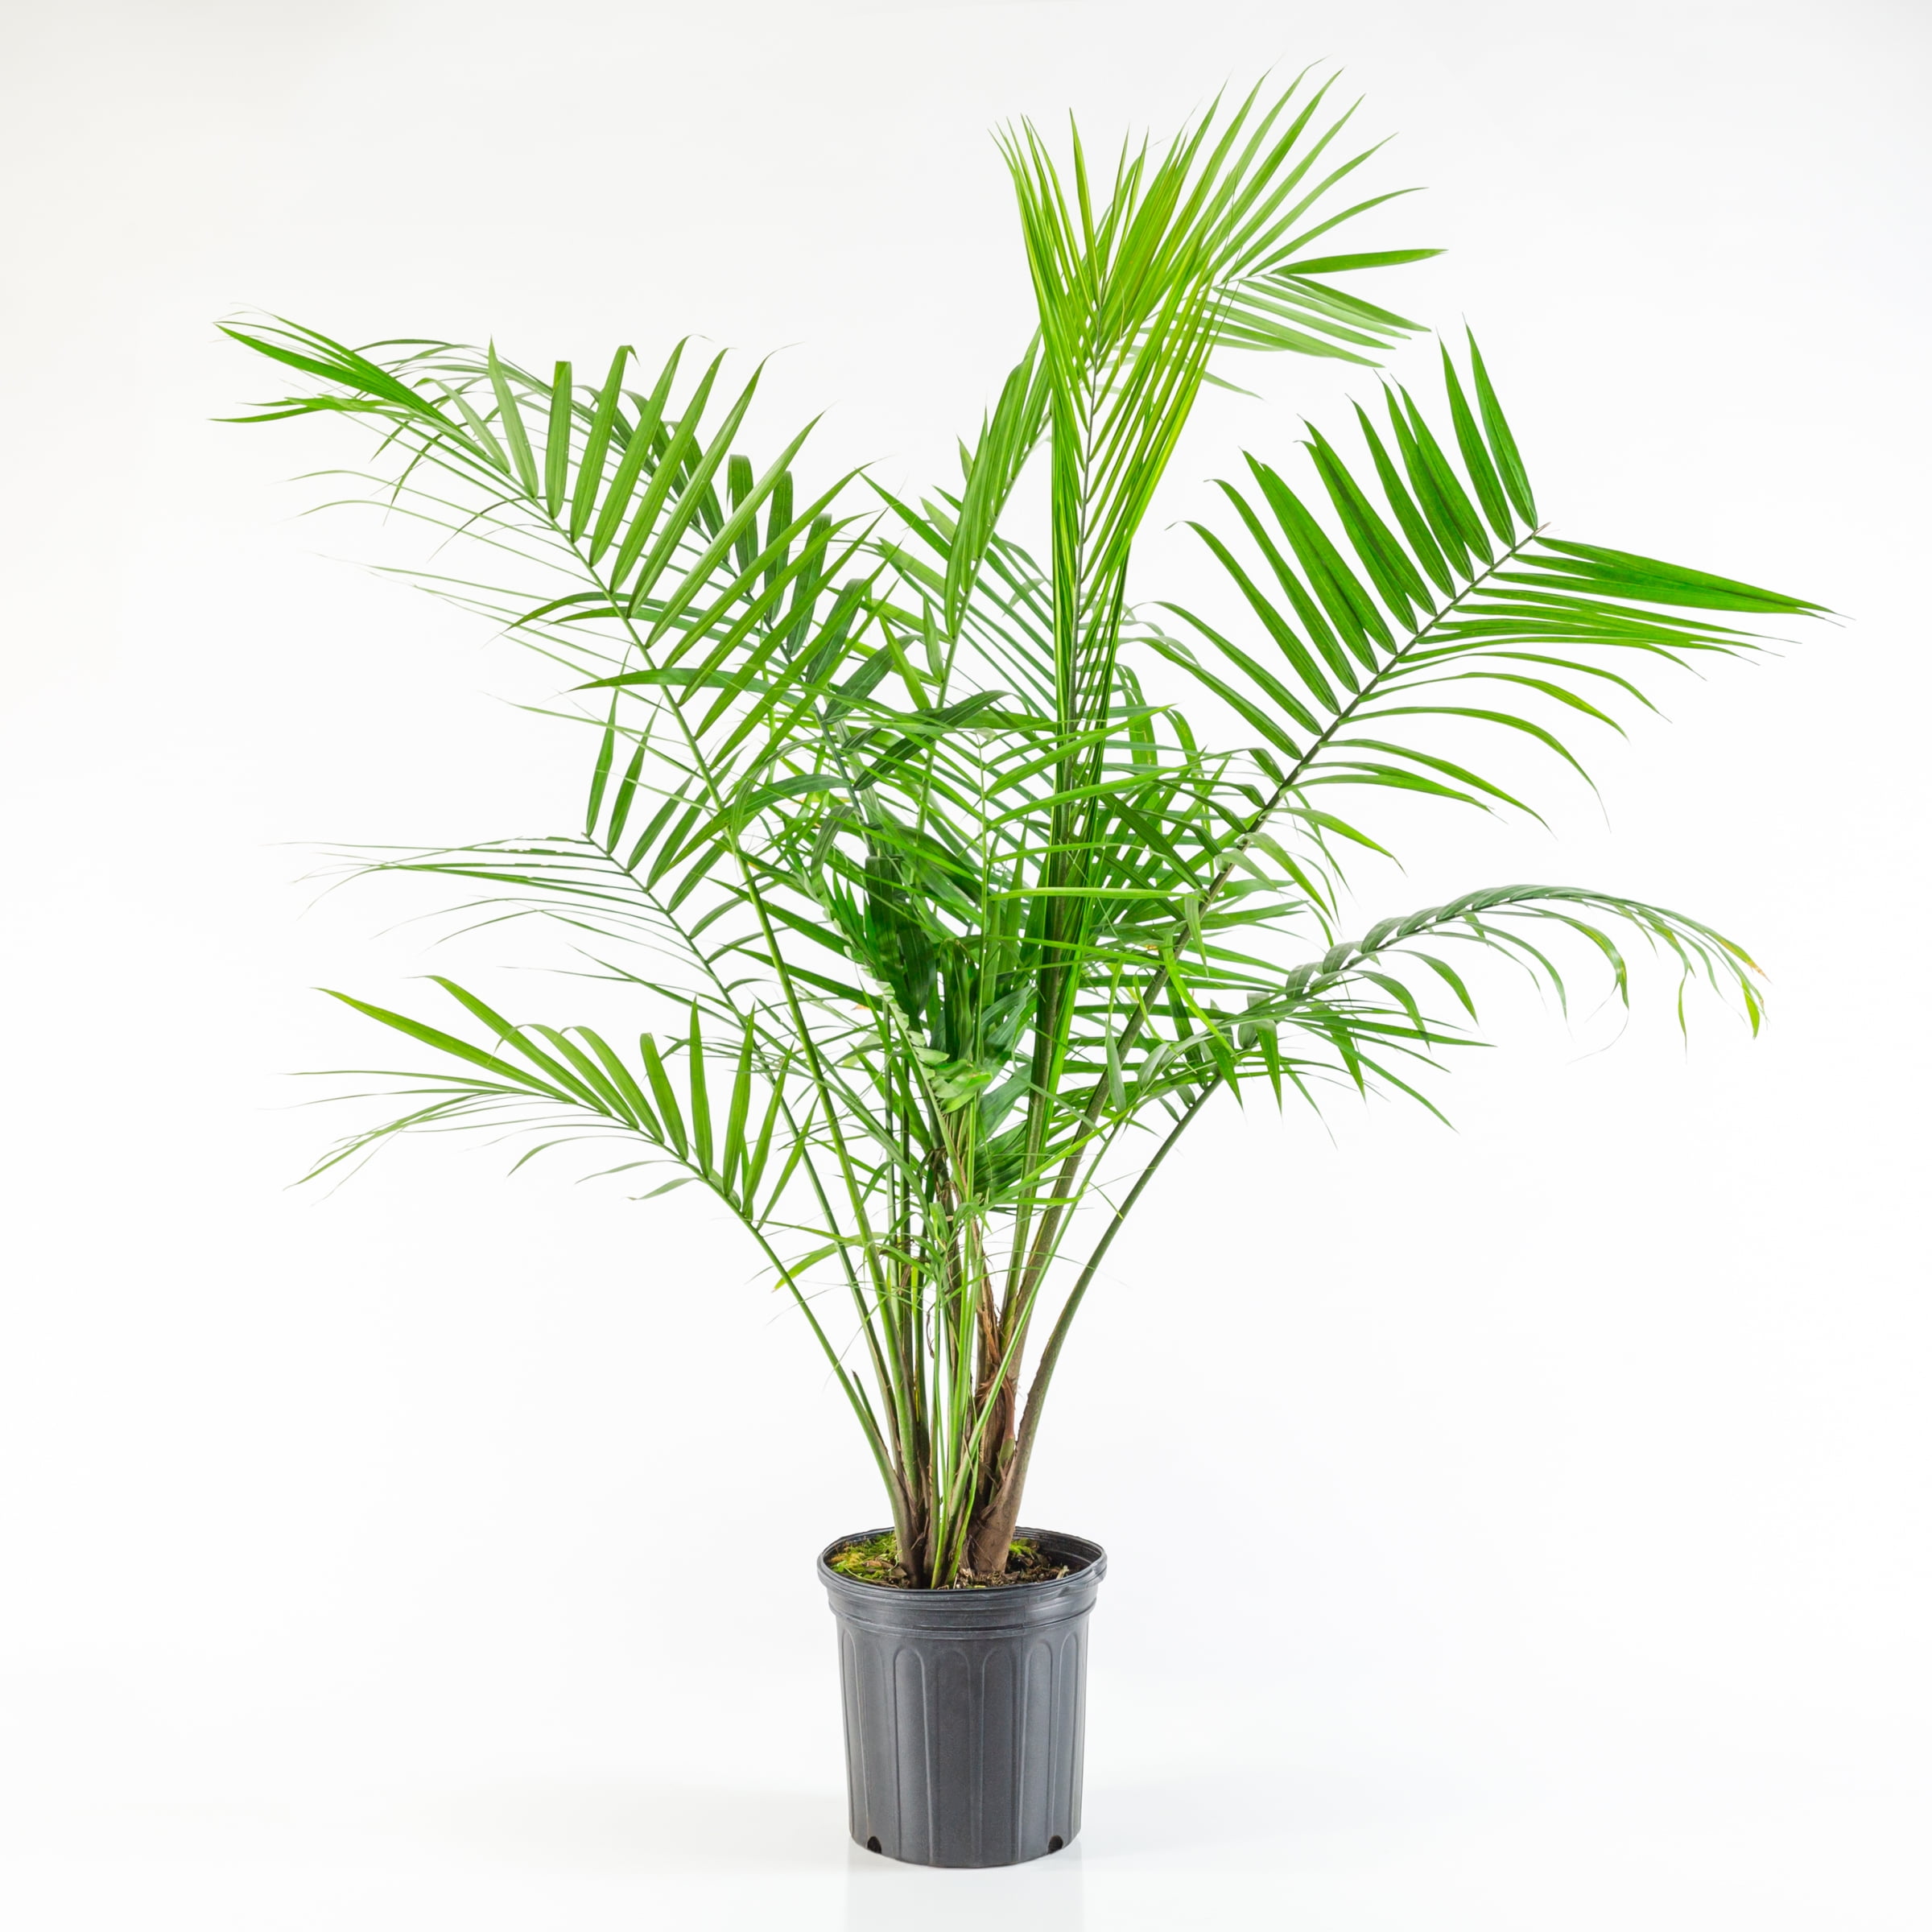 Costa Farms Majesty Palm Tree Live Indoor Plant 3 To 4-Feet Tall Ships With D... 